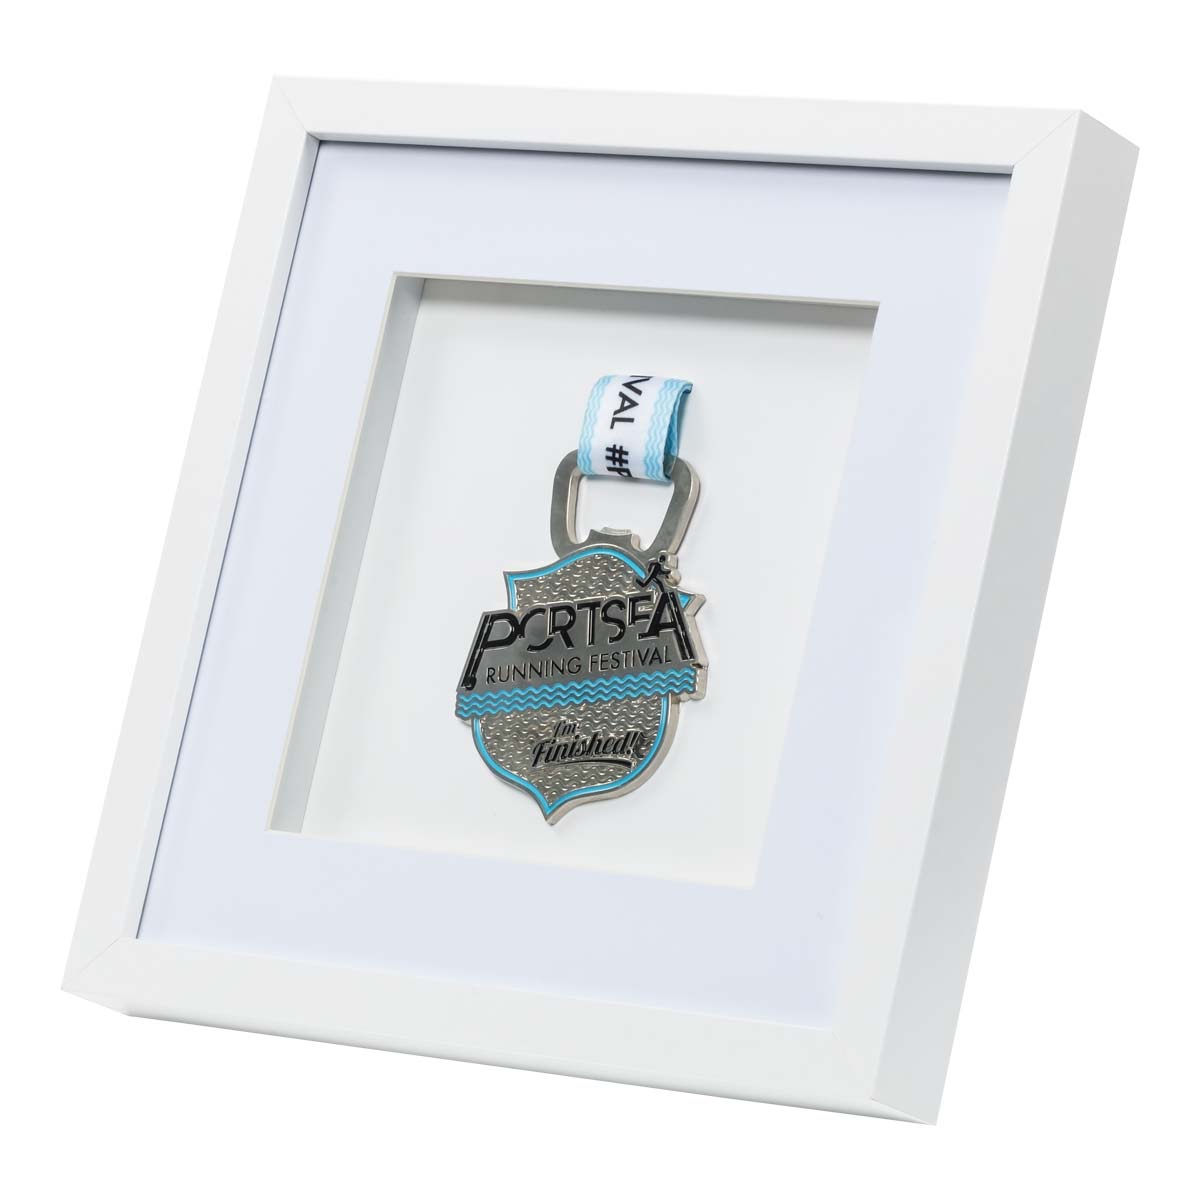 Silver medal from the Portsea Running festival framed in a white square frame, right angle